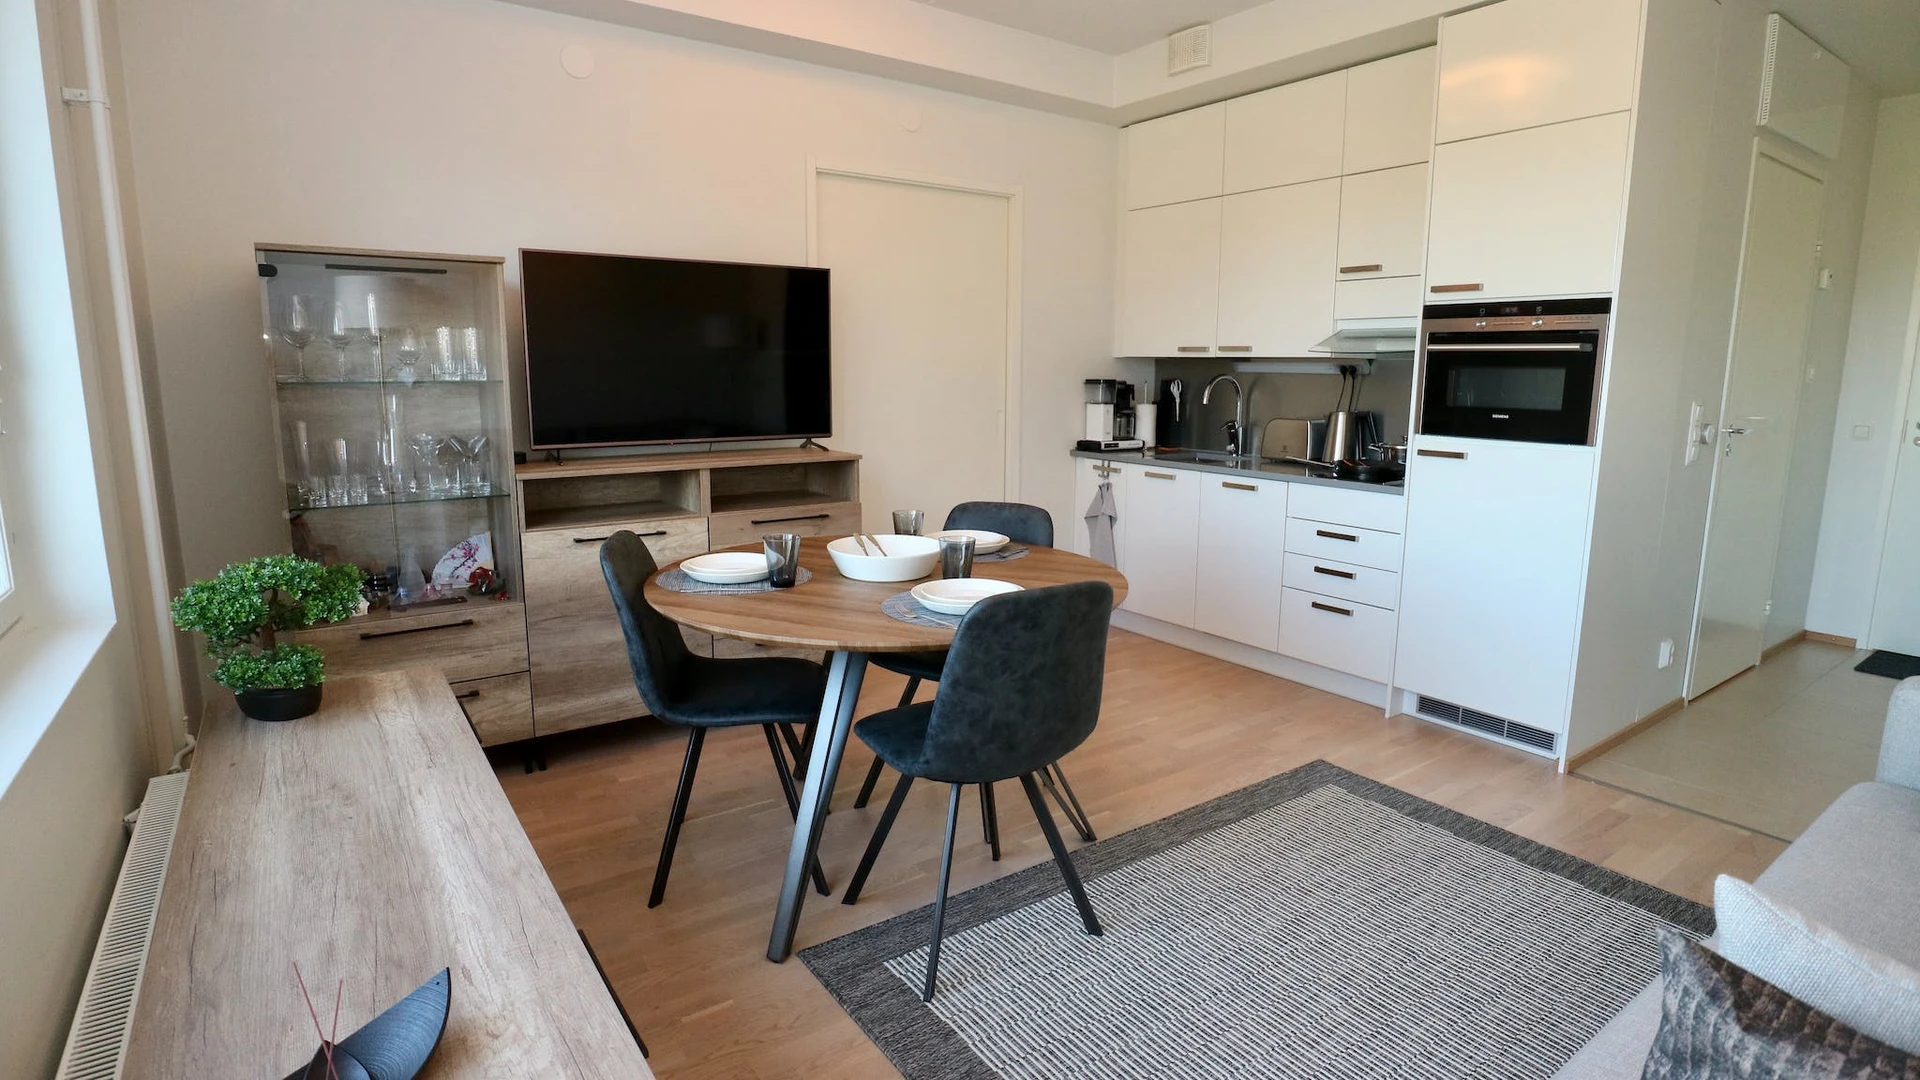 Accommodation in the centre of Helsinki